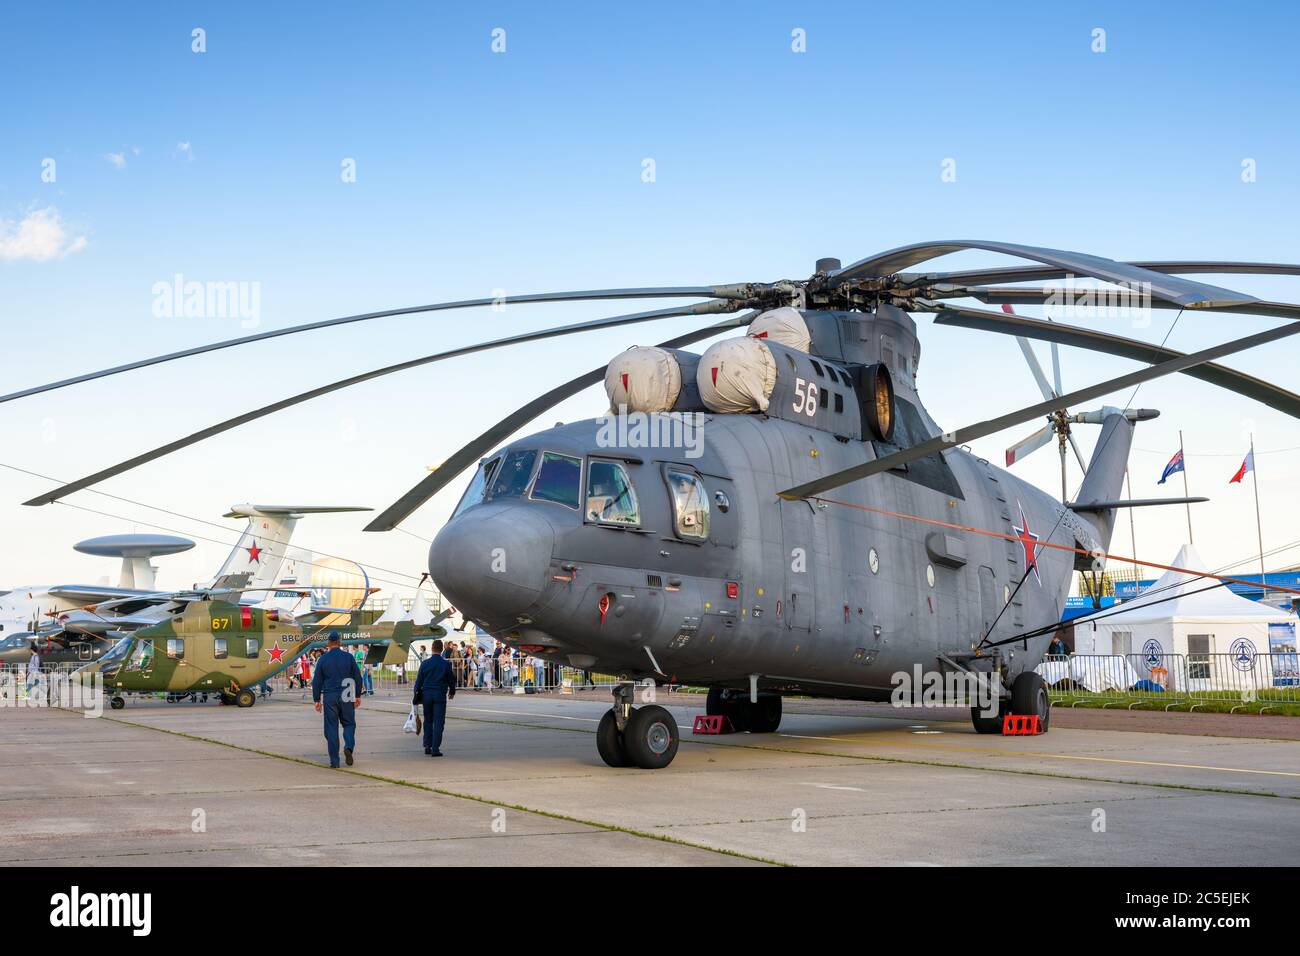 Moscow Region - July 21, 2017: Russian heavy transport helicopter Mil Mi-26 at the International Aviation and Space Salon (MAKS) in Zhukovsky.  it is Stock Photo